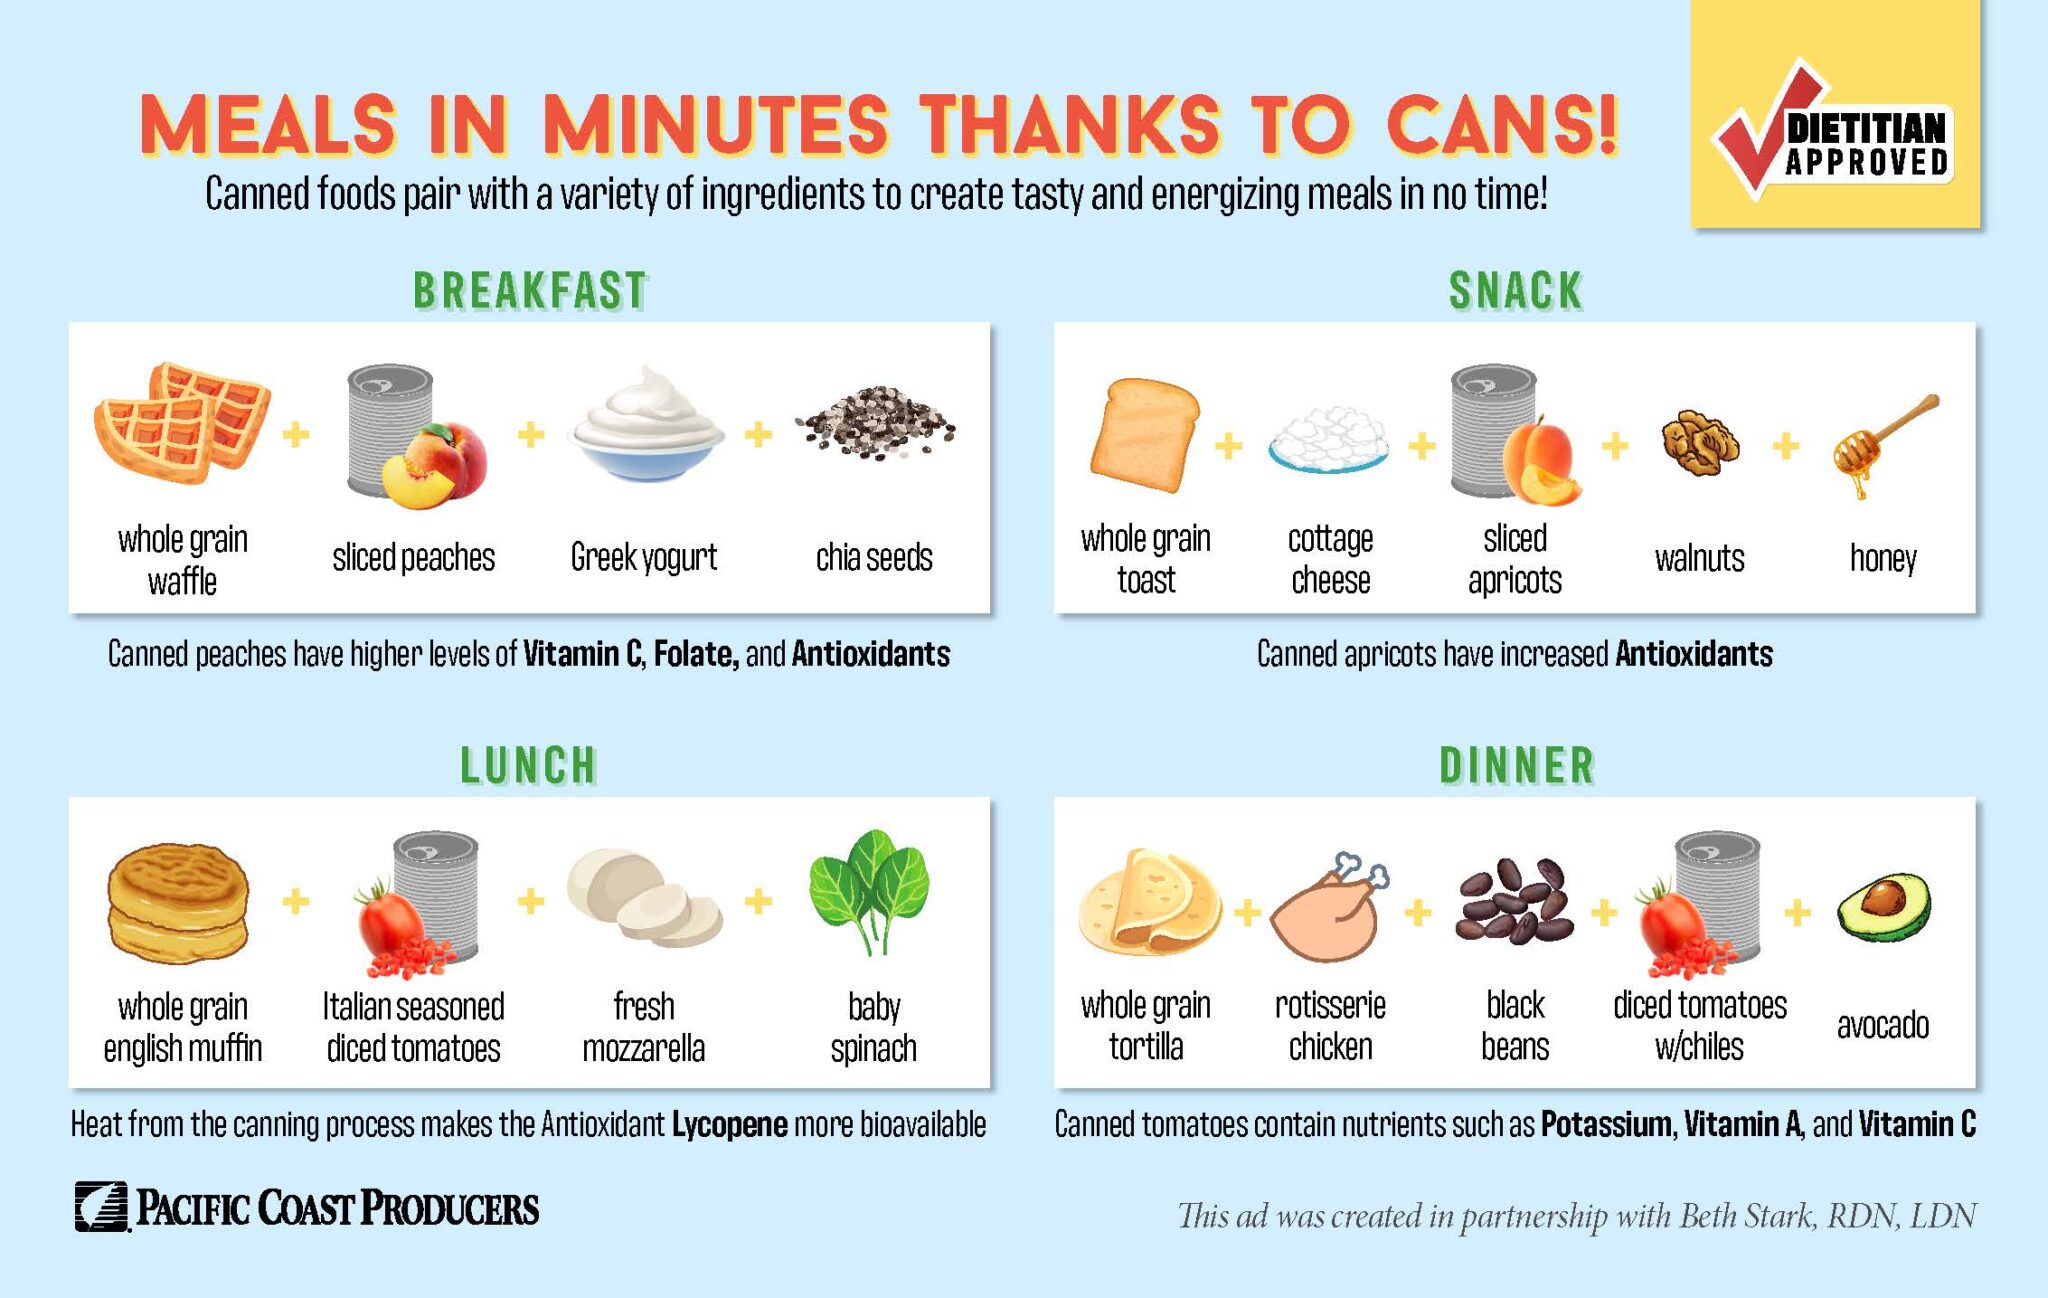 Meals in minutes thanks to can.